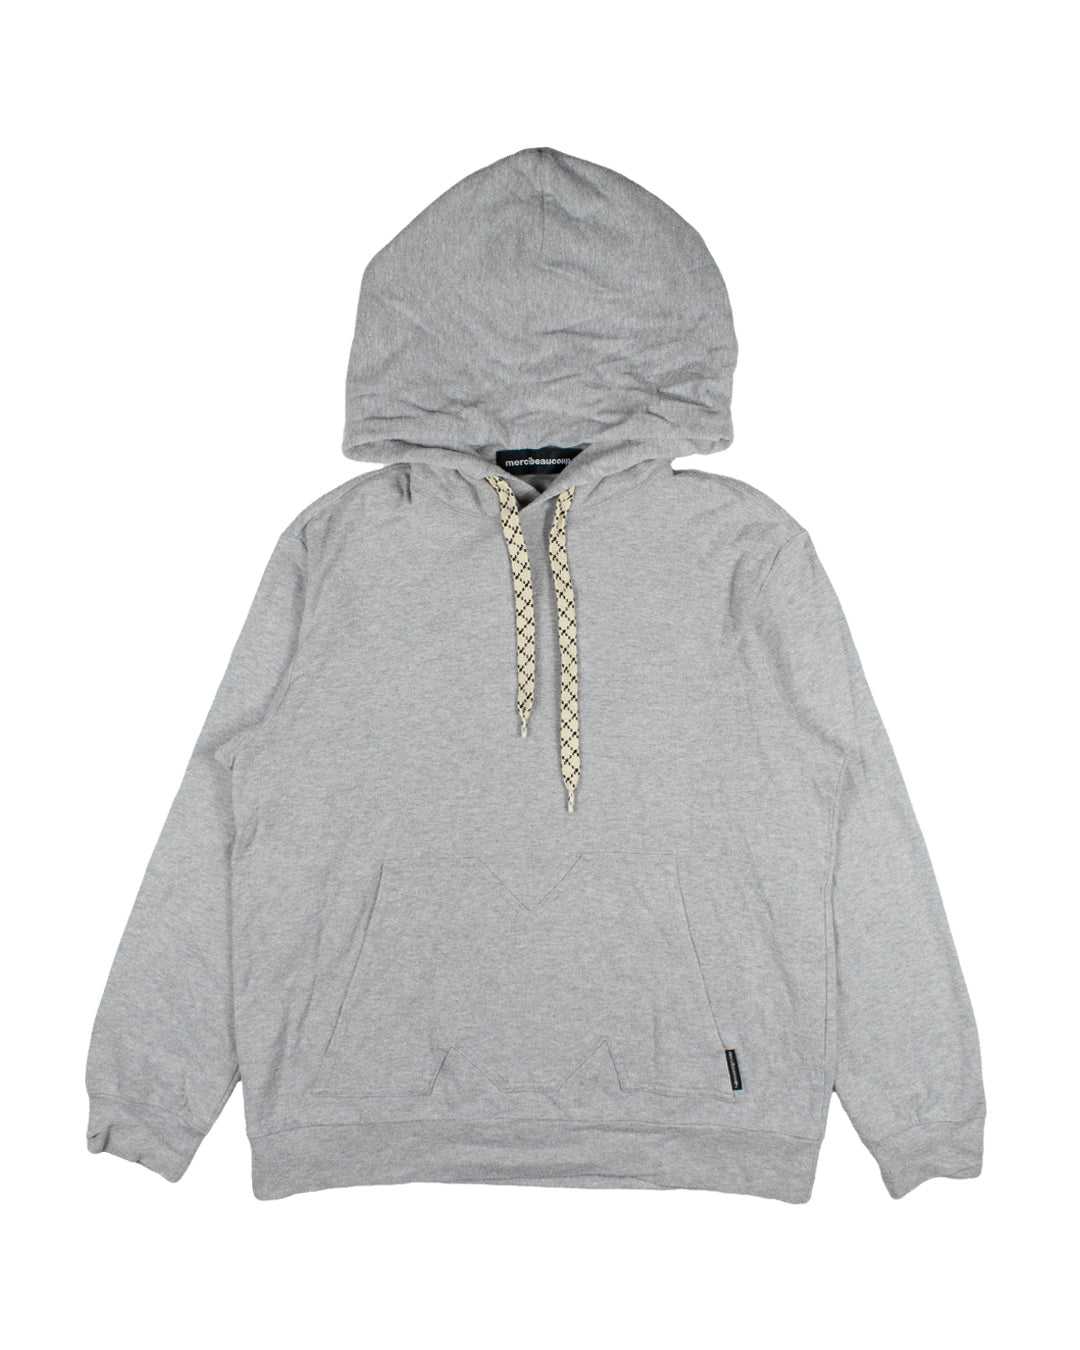 Mercibeaucoup M Pouch Hoodie